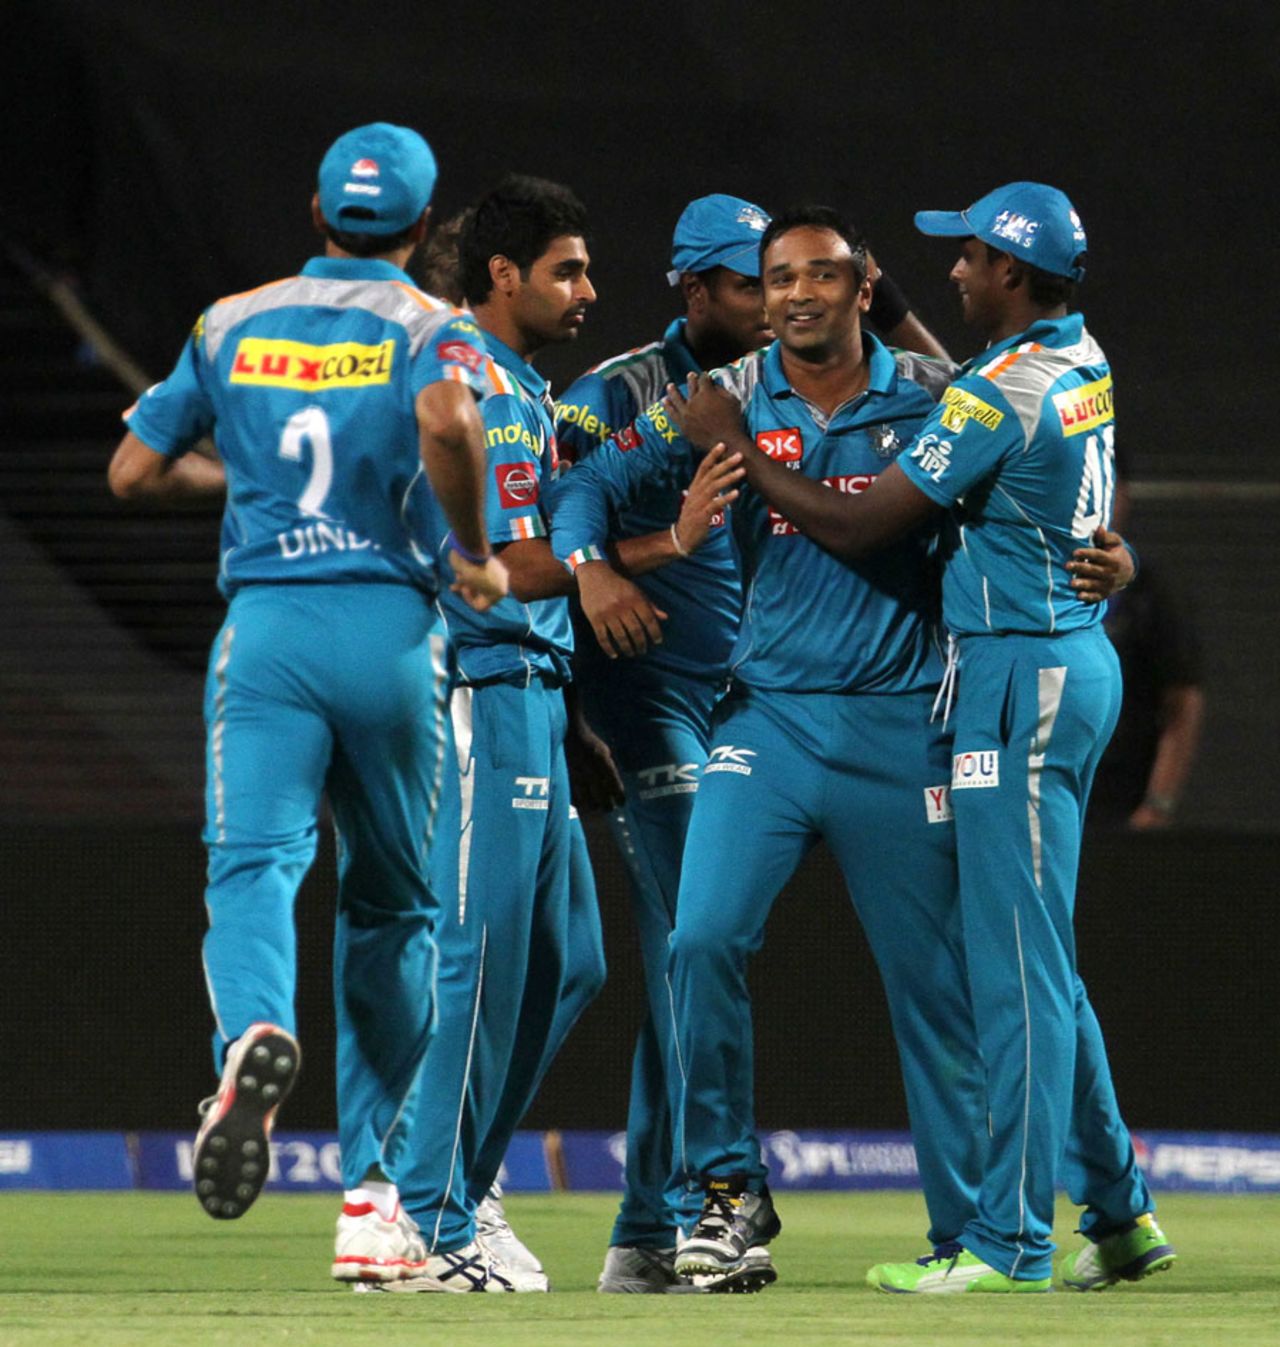 T Suman got the big wicket of Chris Gayle, Pune Warriors v Royal Challengers Bangalore, IPL 2013, Pune, May 2, 2013